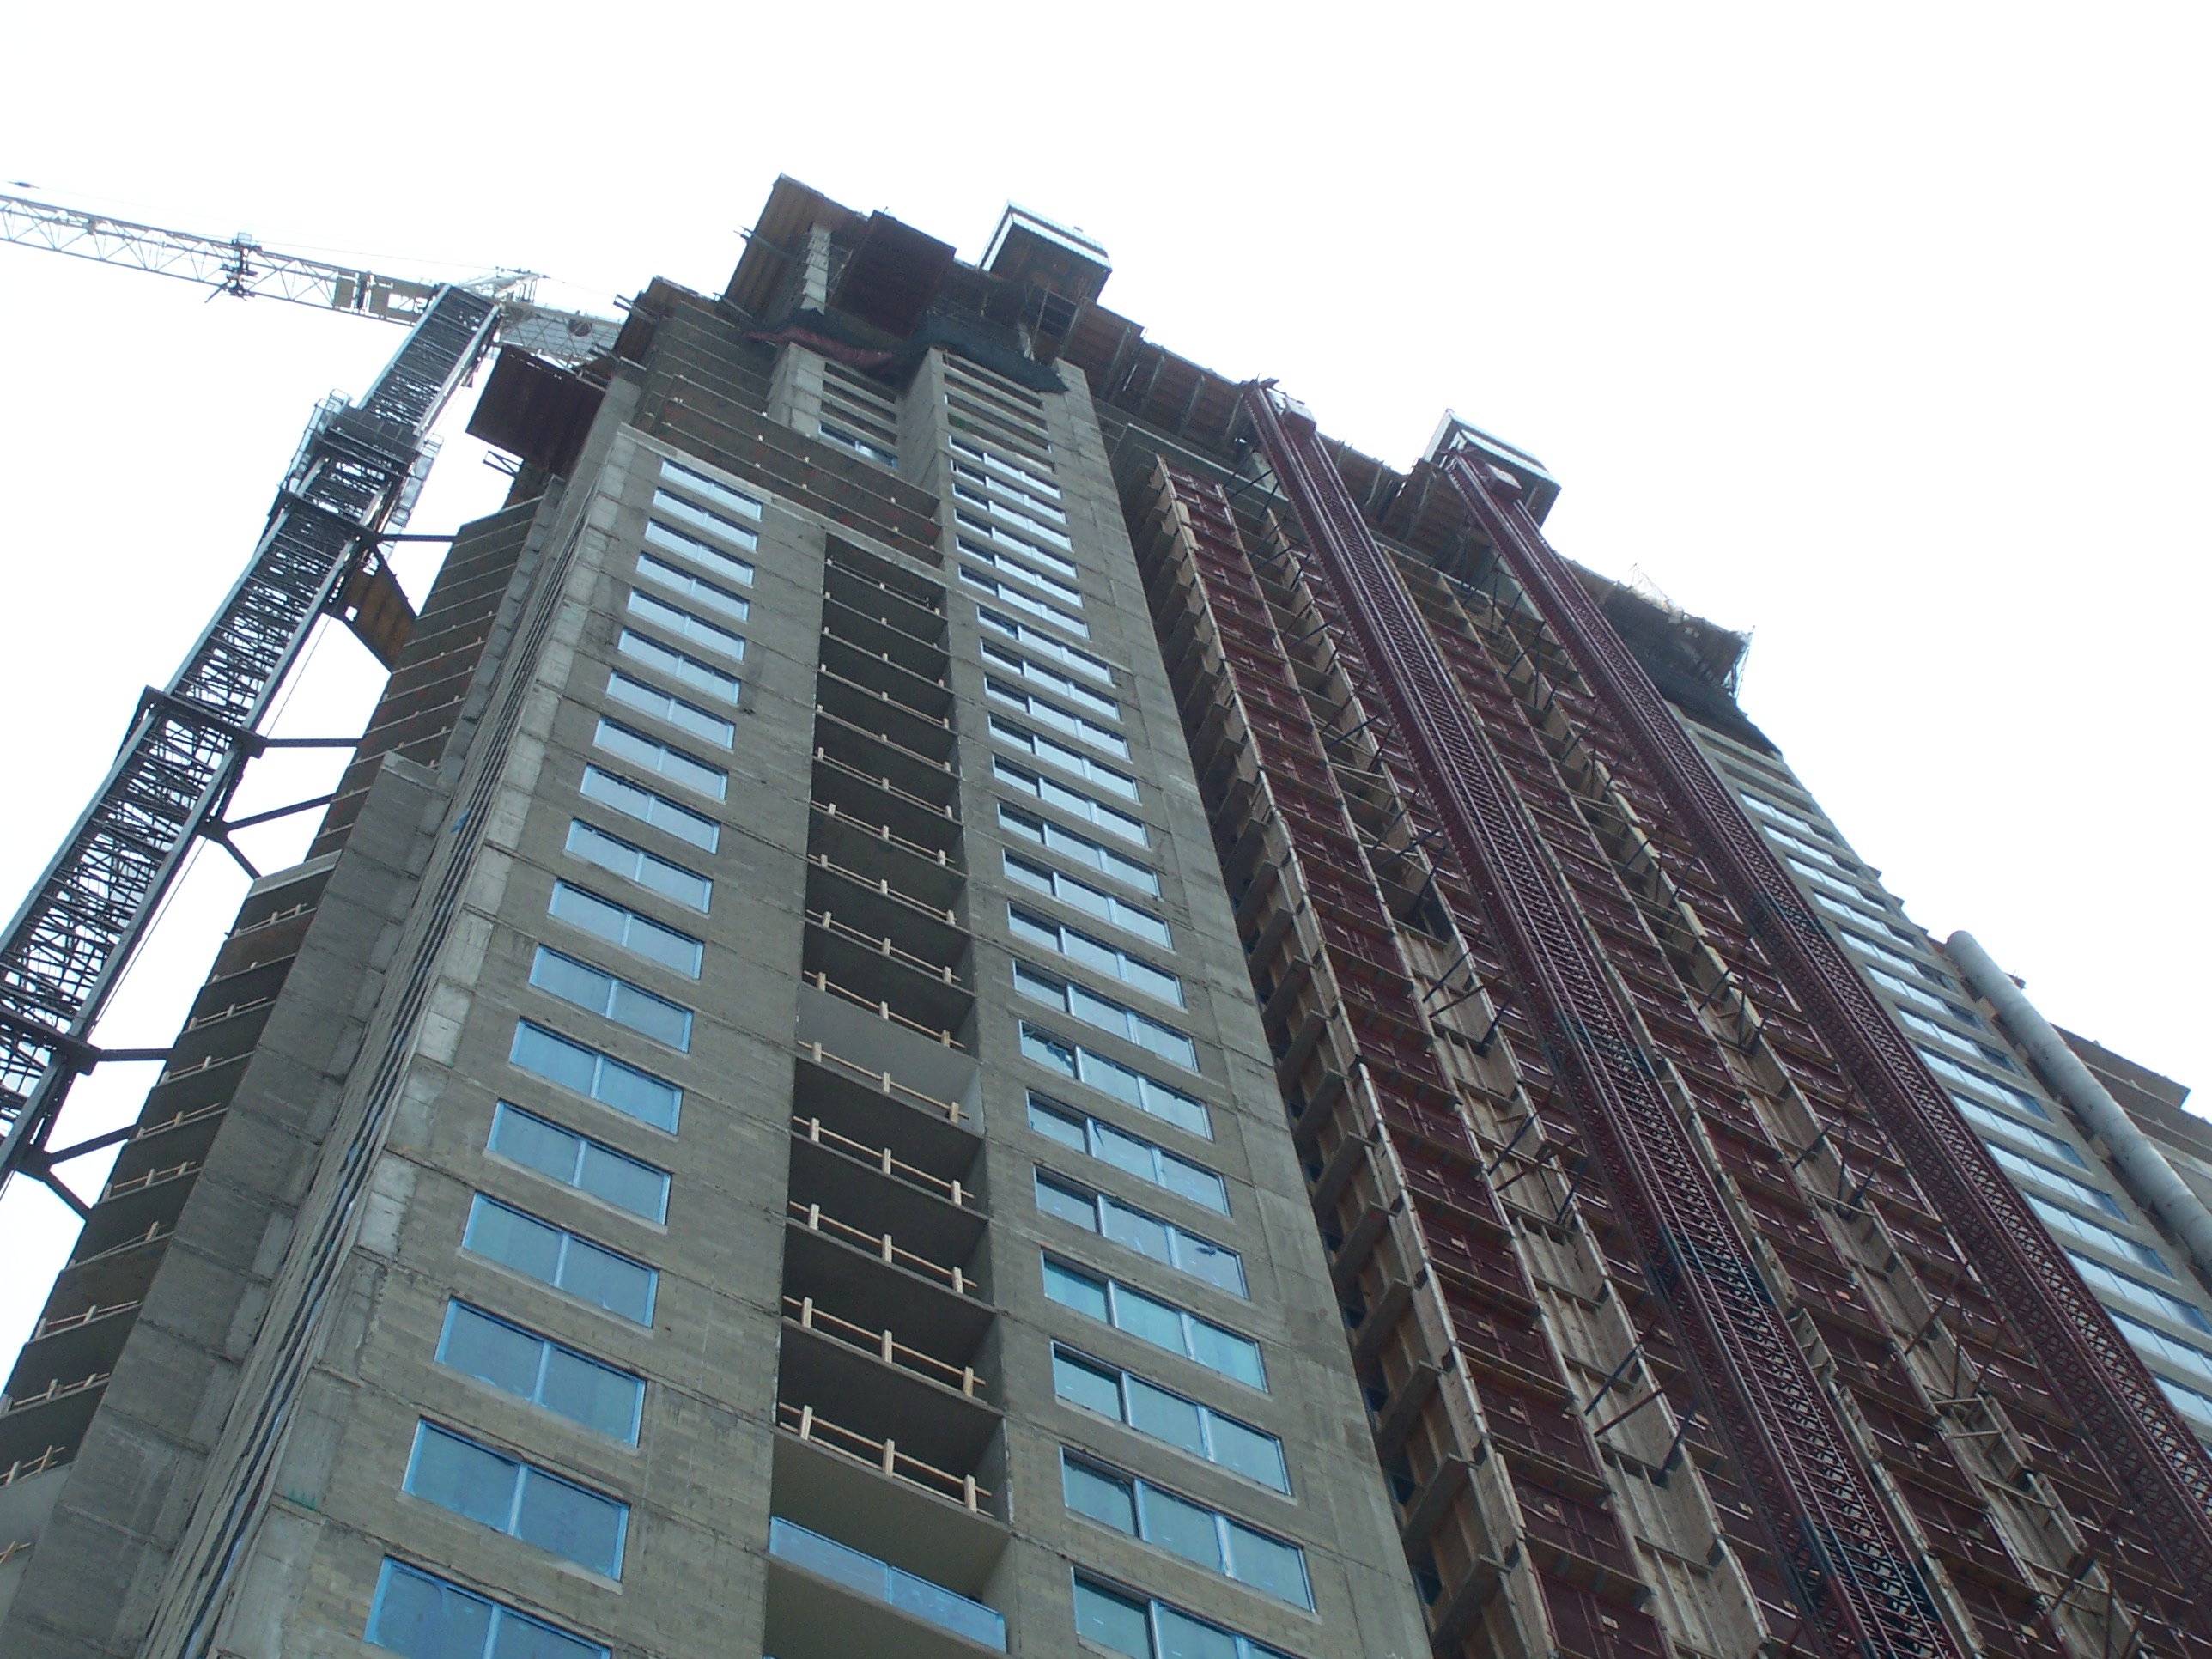 File:Building under construction in Miami from below.jpg - Wikimedia ...